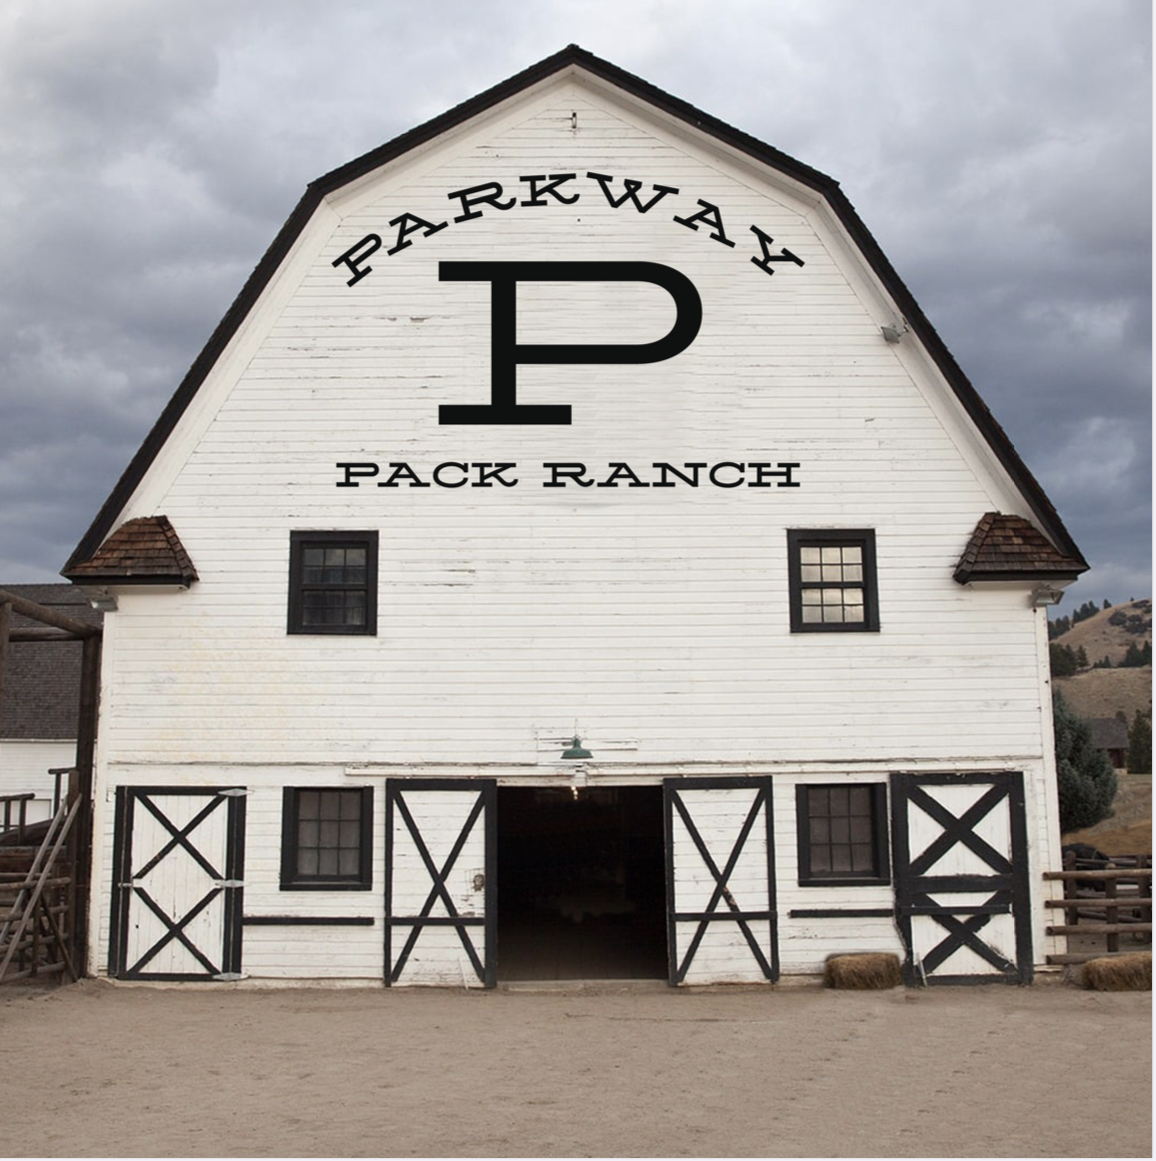 Parkway Pack Ranch